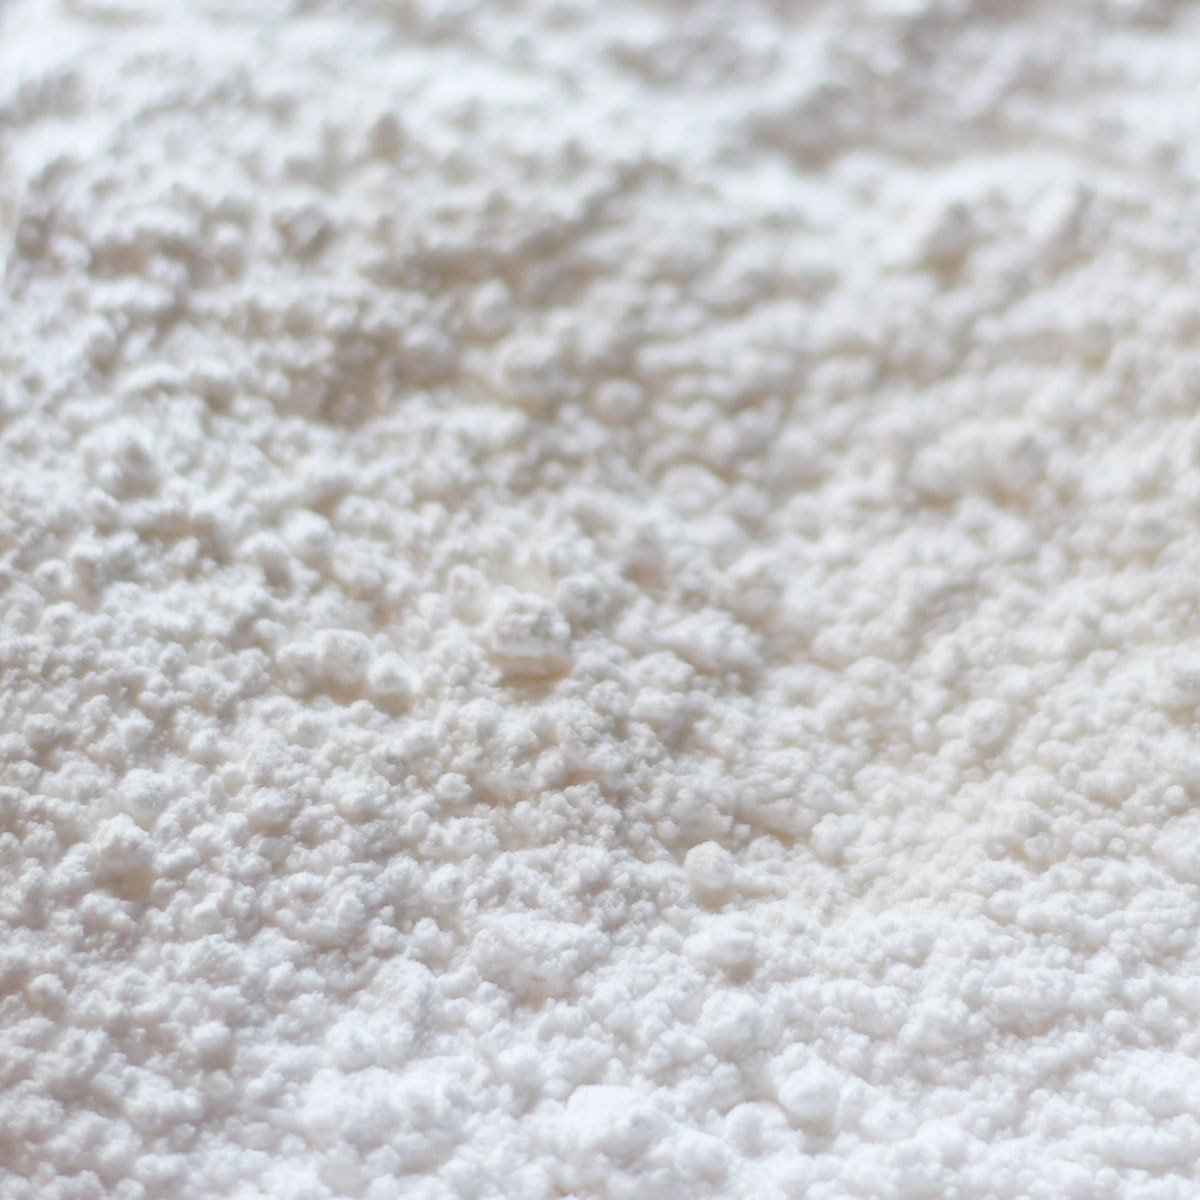 How to Make your Own Powdered Sugar